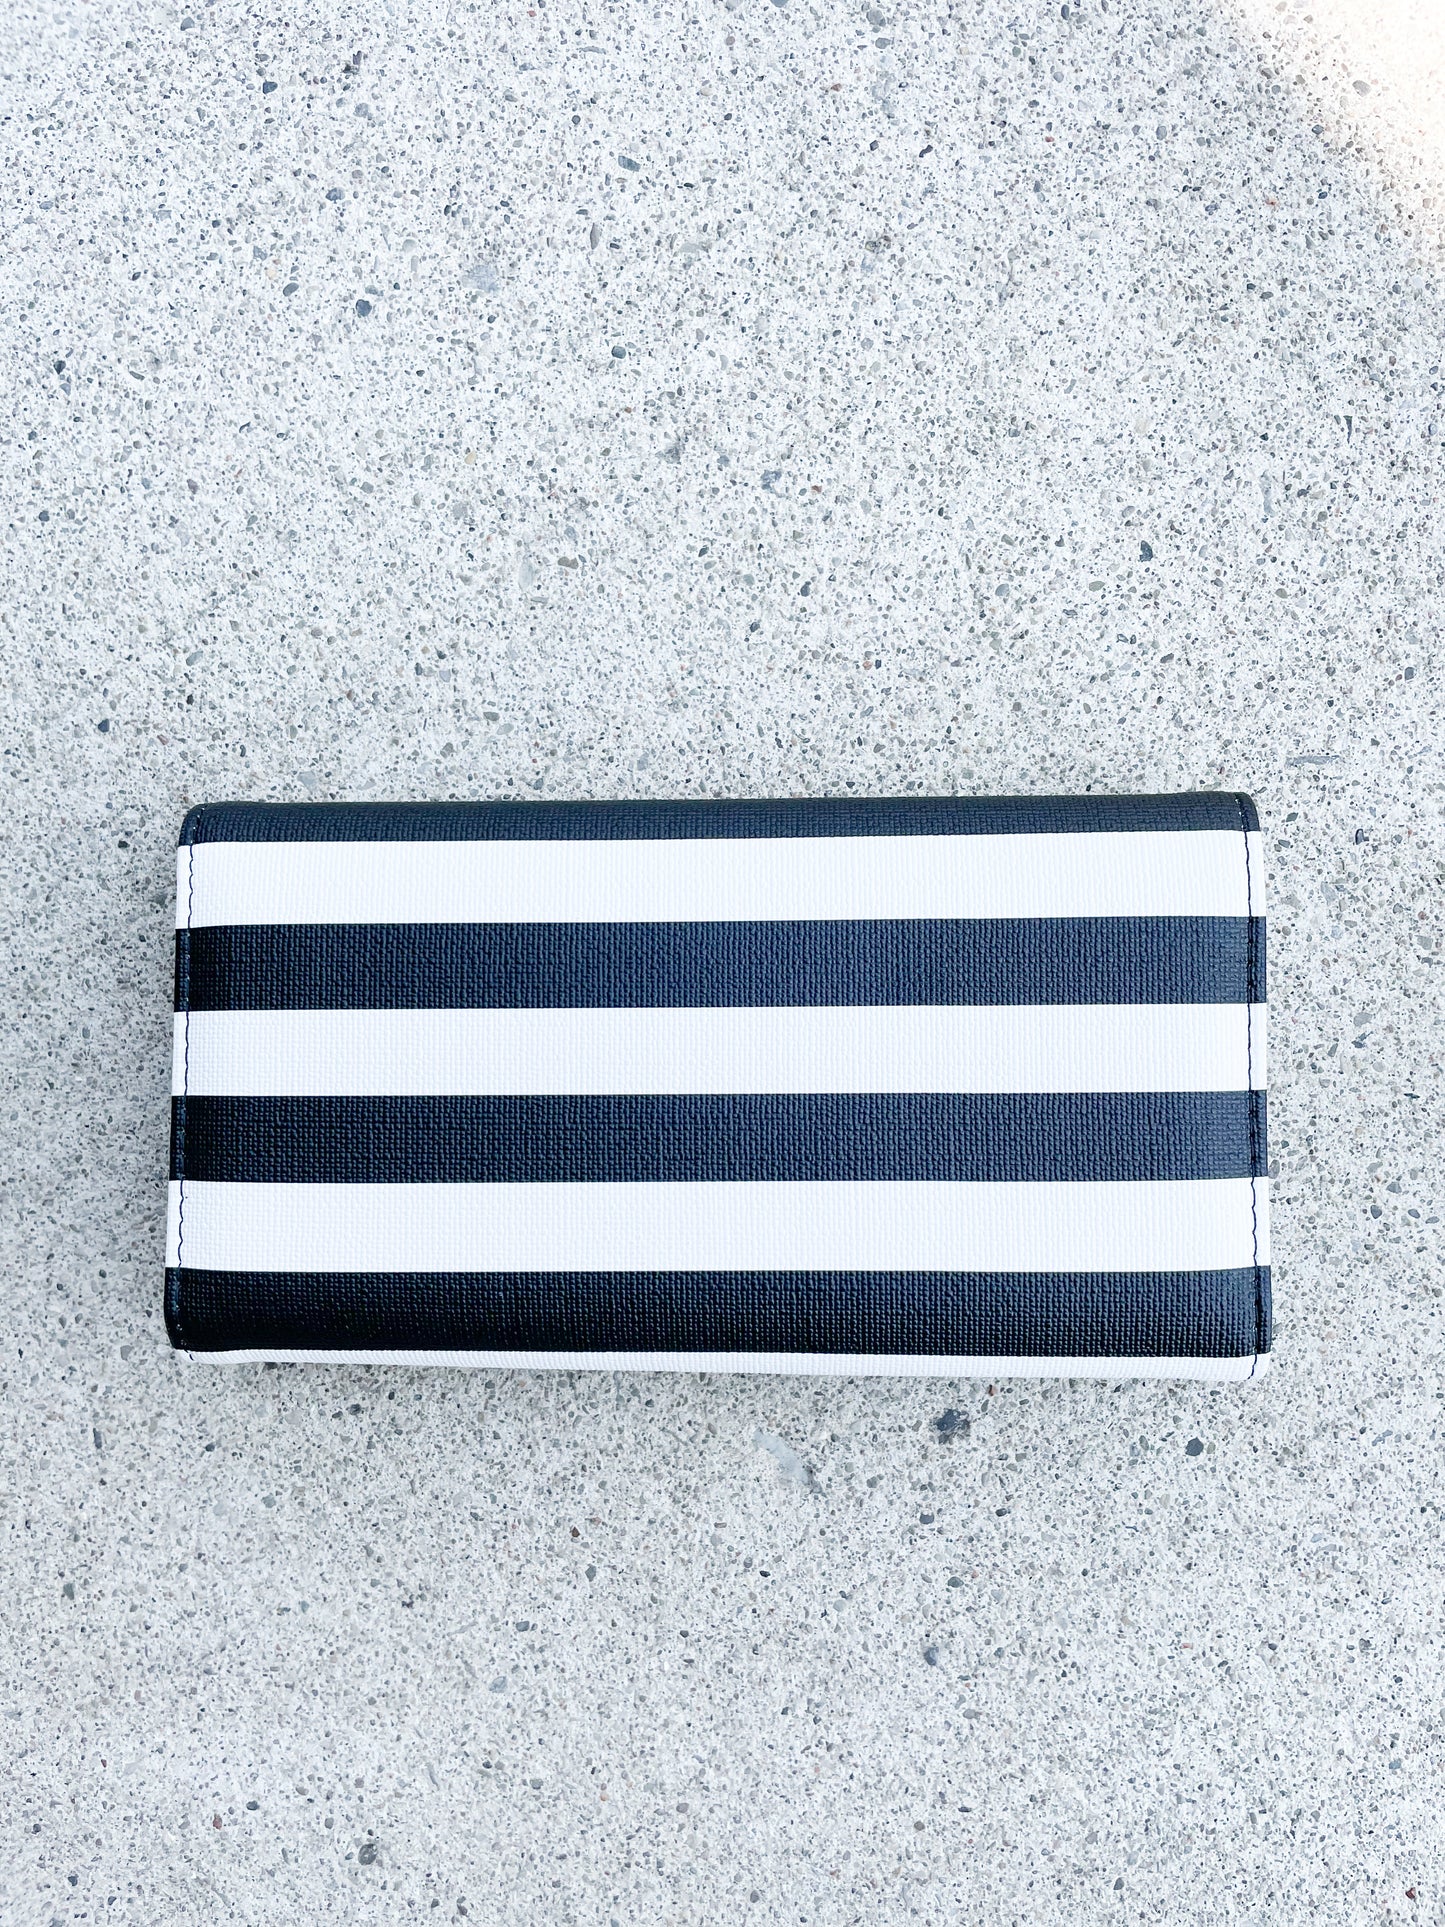 Kut From the Kloth Black White Stripe Wallet NWT